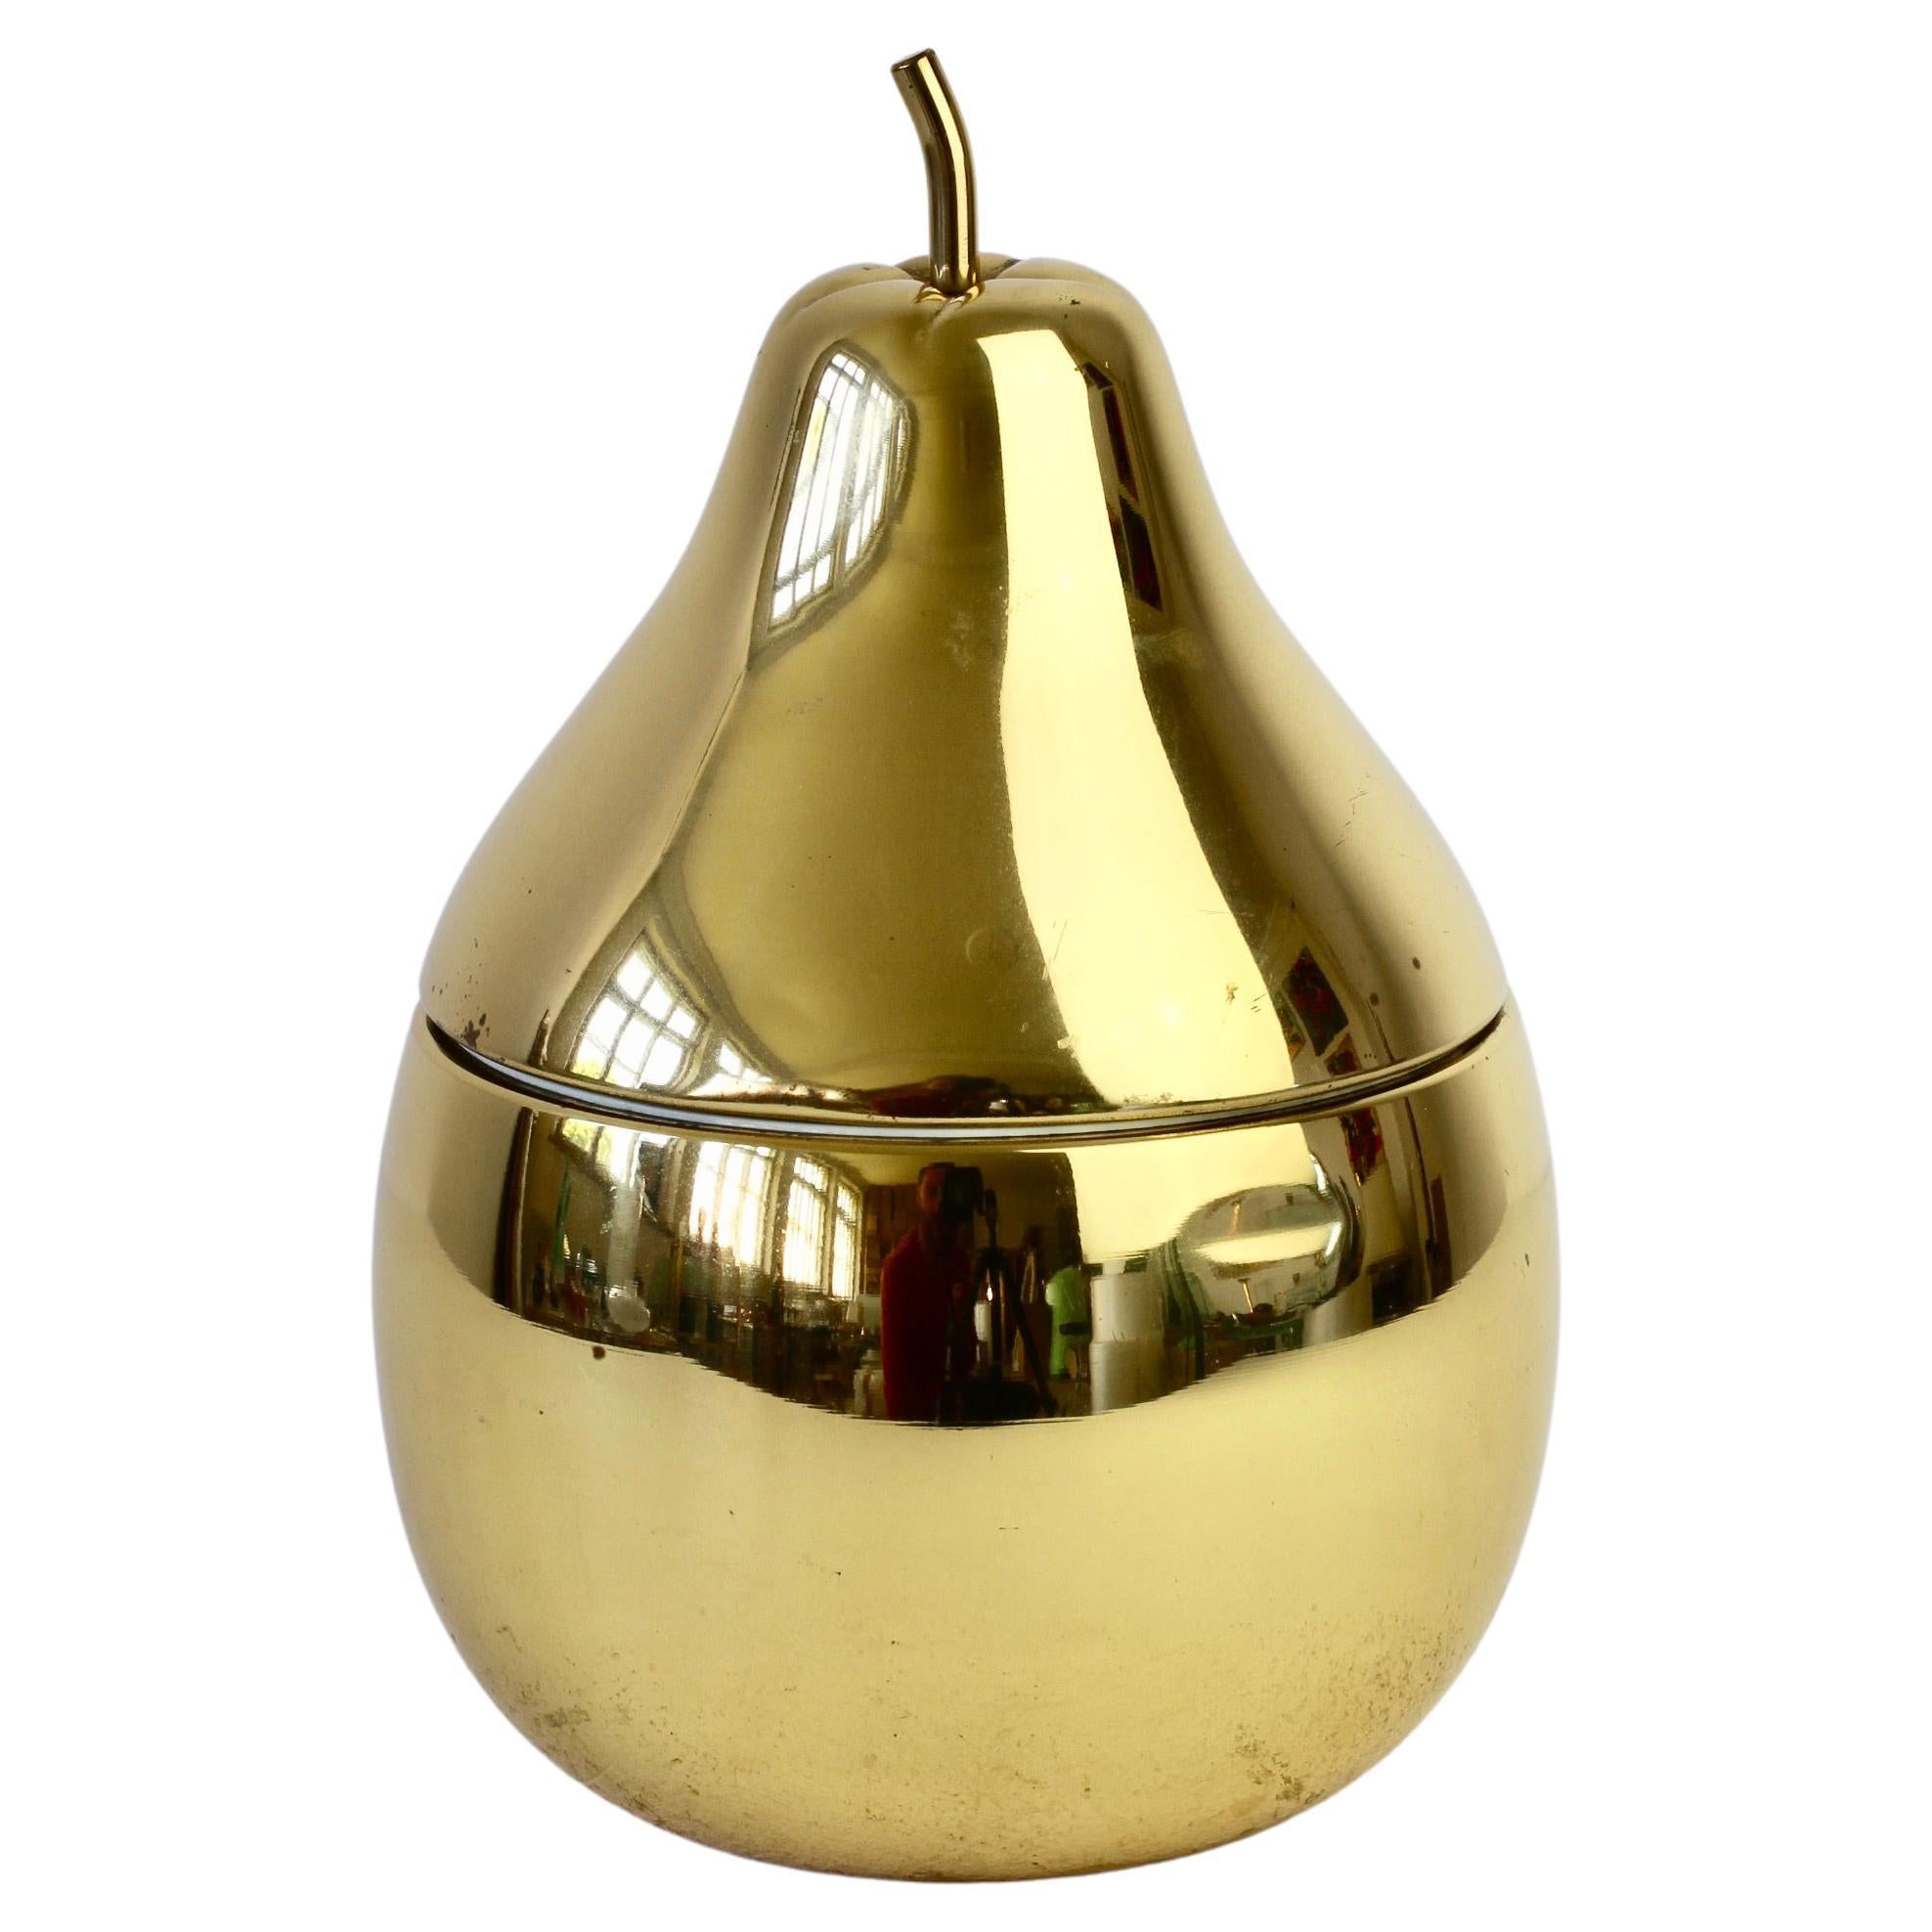 Ettore Sottsass Style Vintage Pear Shaped Brass Ice Cube Bucket or Holder, 1970s For Sale